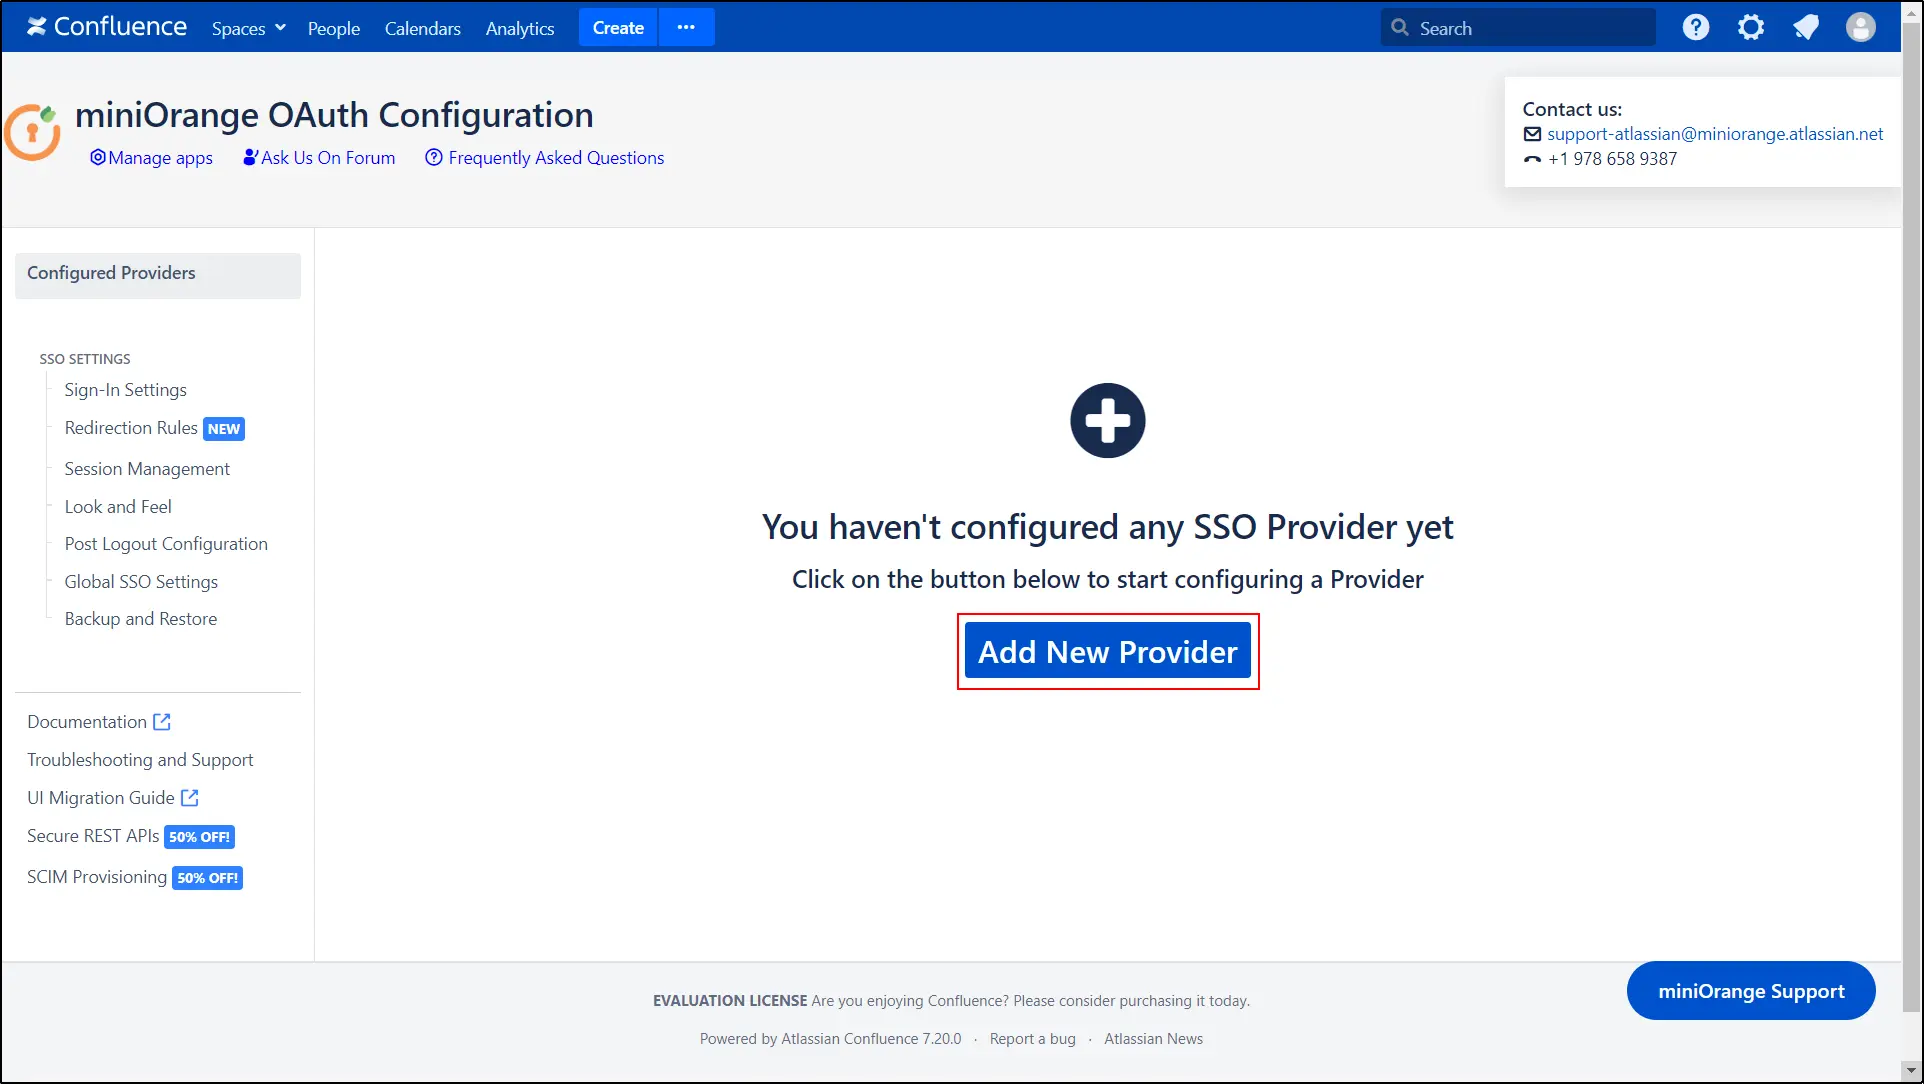  Drupal Confluence OAuth OIDC Provider - Click on Add New Provider